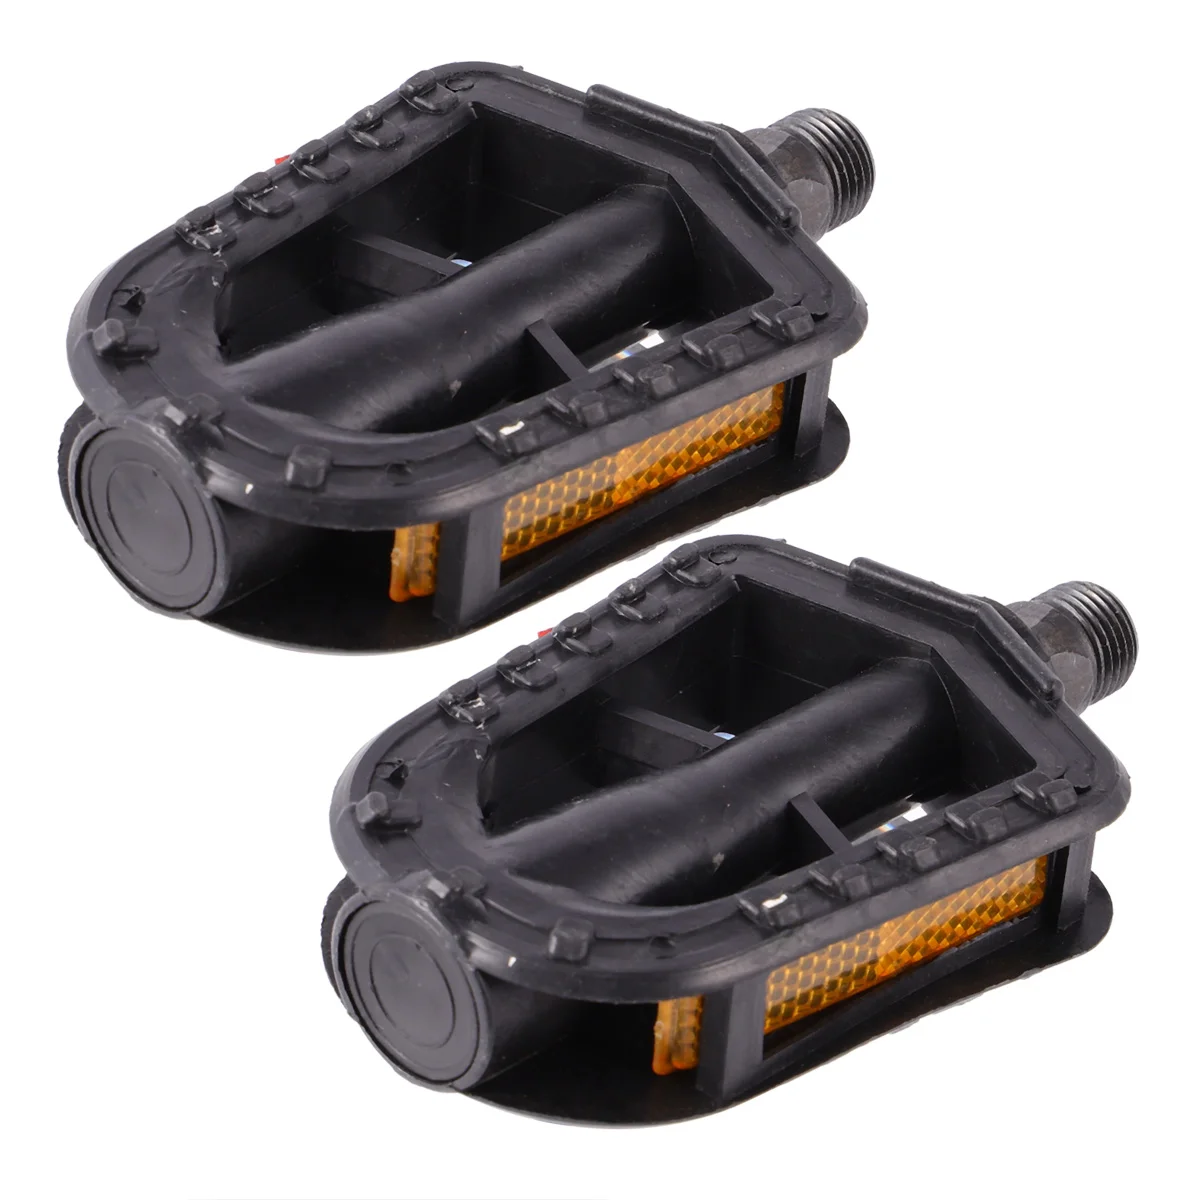 

1 Pair Kids Pedal Anti Skid Ultralight Pedals Replacement Parts Cycling Supplies for Toddler Children Black